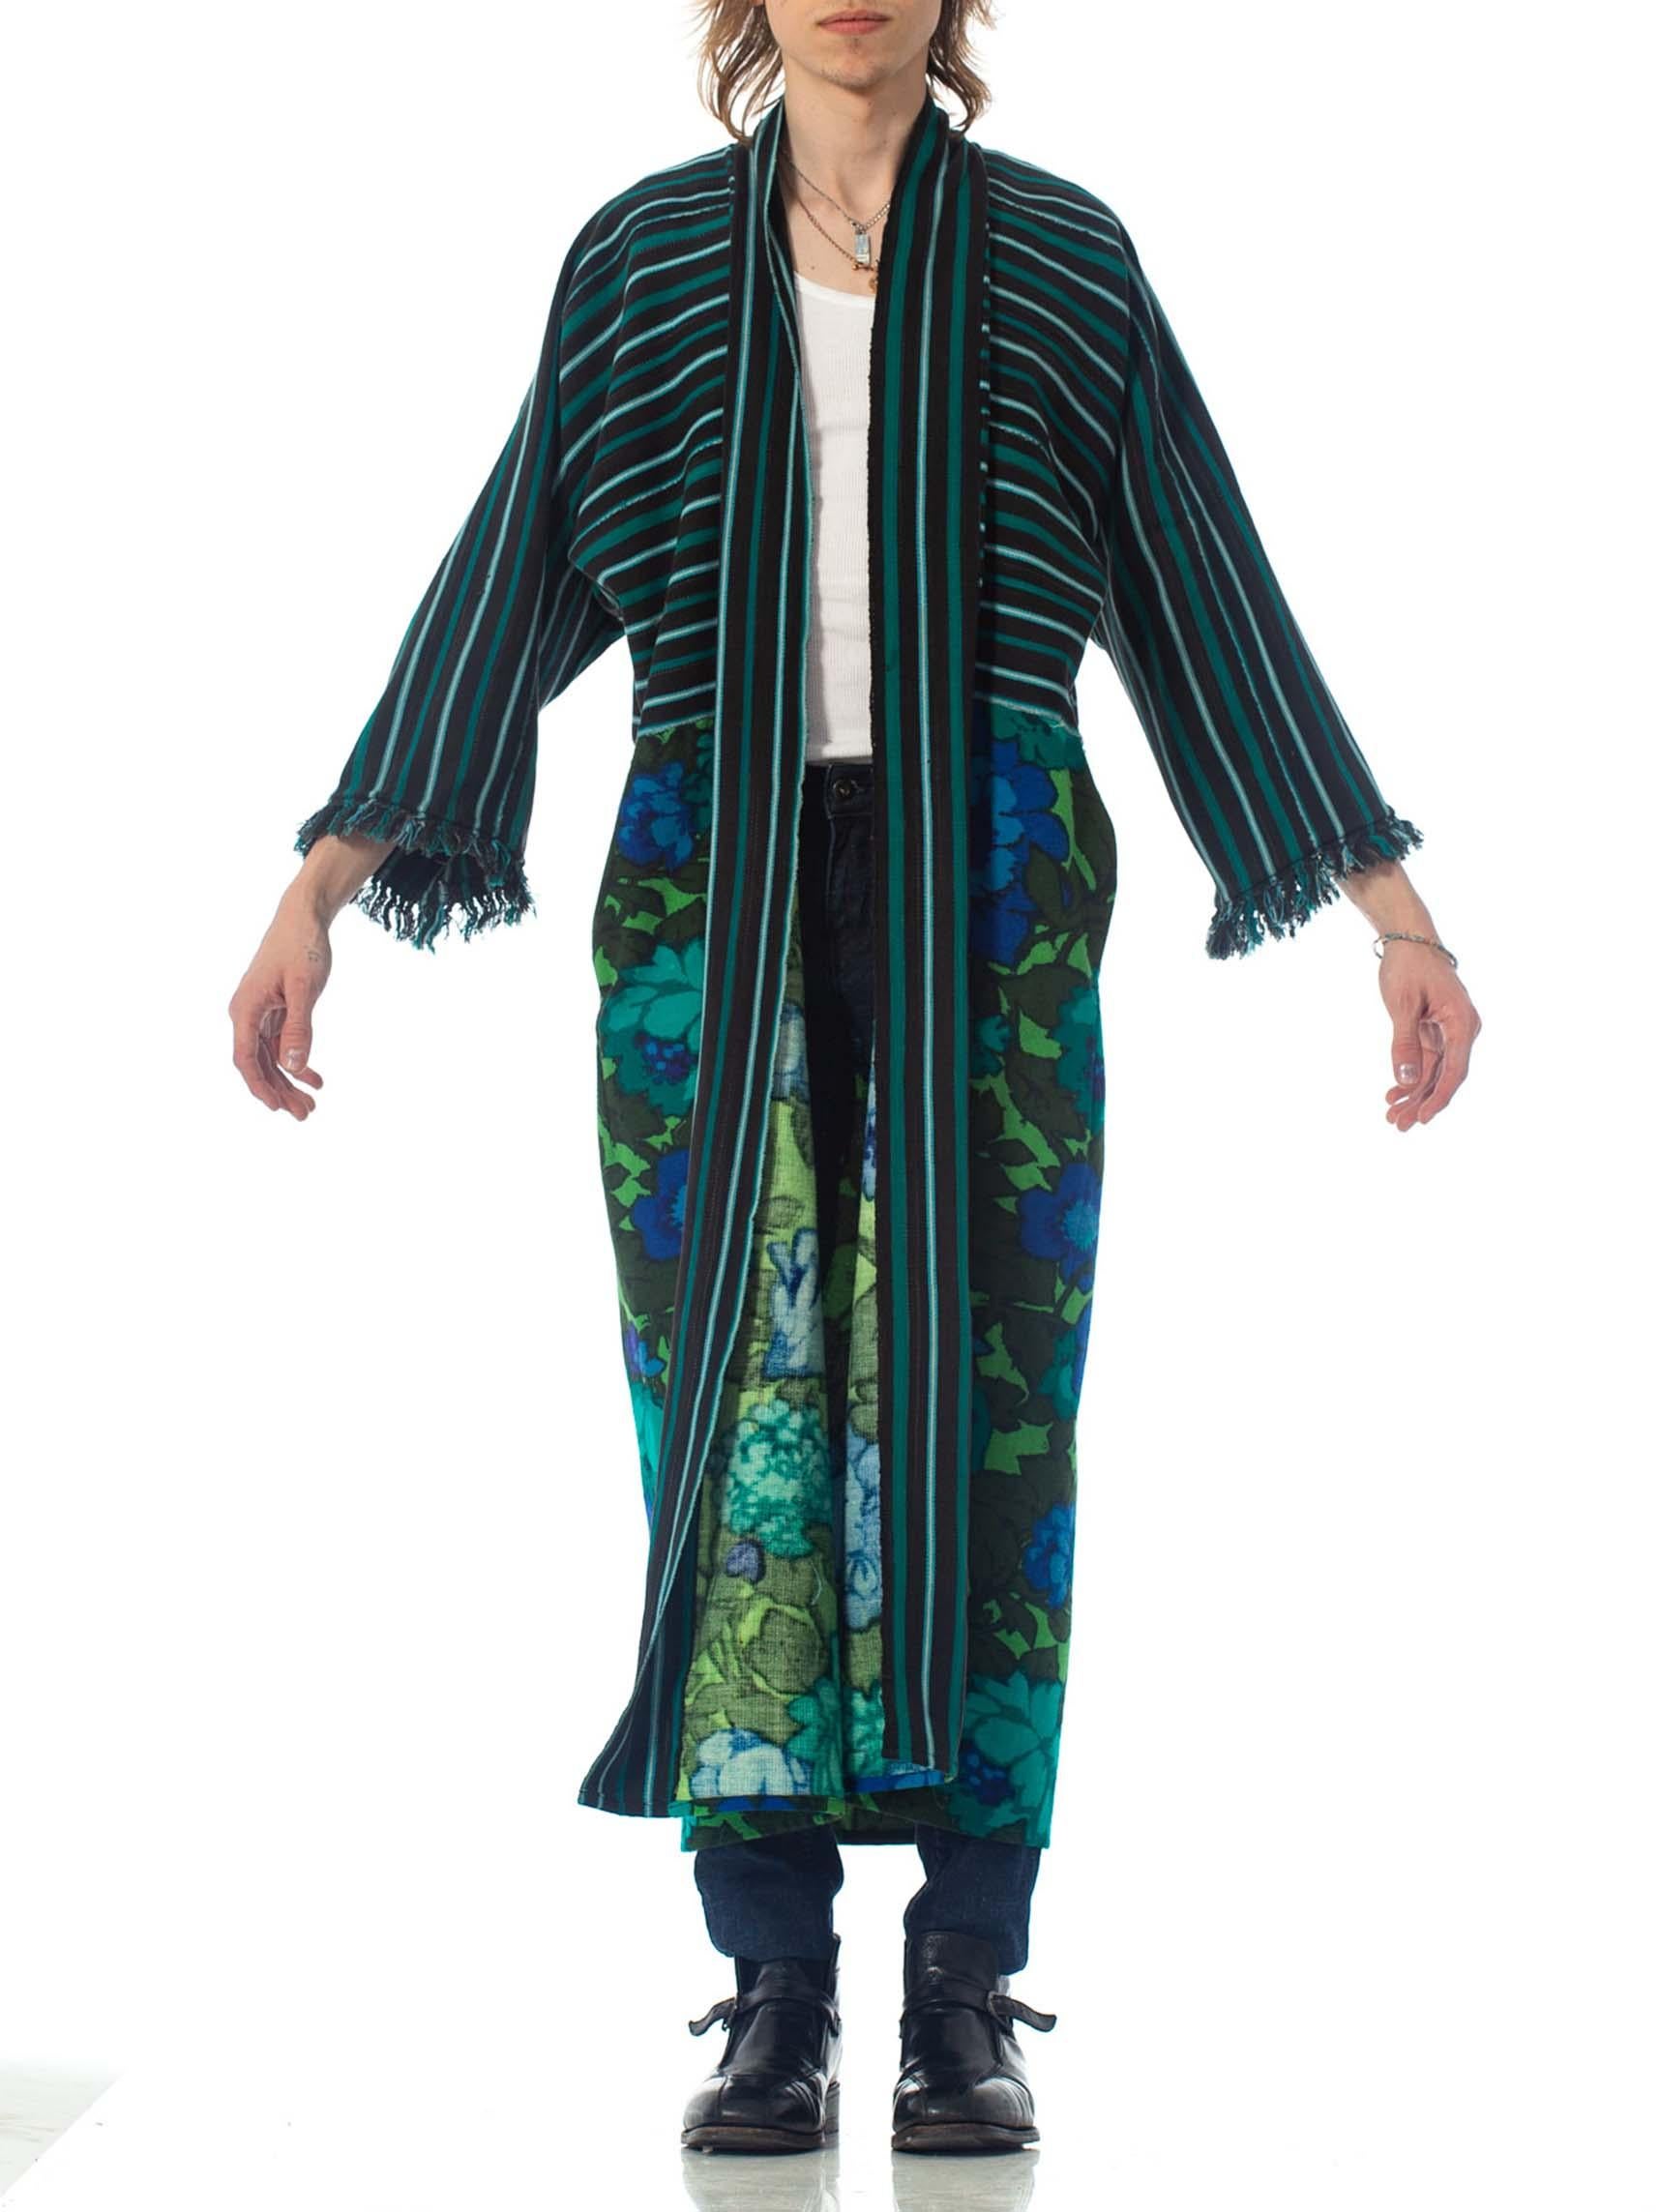 MORPHEW COLLECTION Black & Green Cotton Duster Coat Made From African Indigo 1960S Floral Upcycled Fabrics